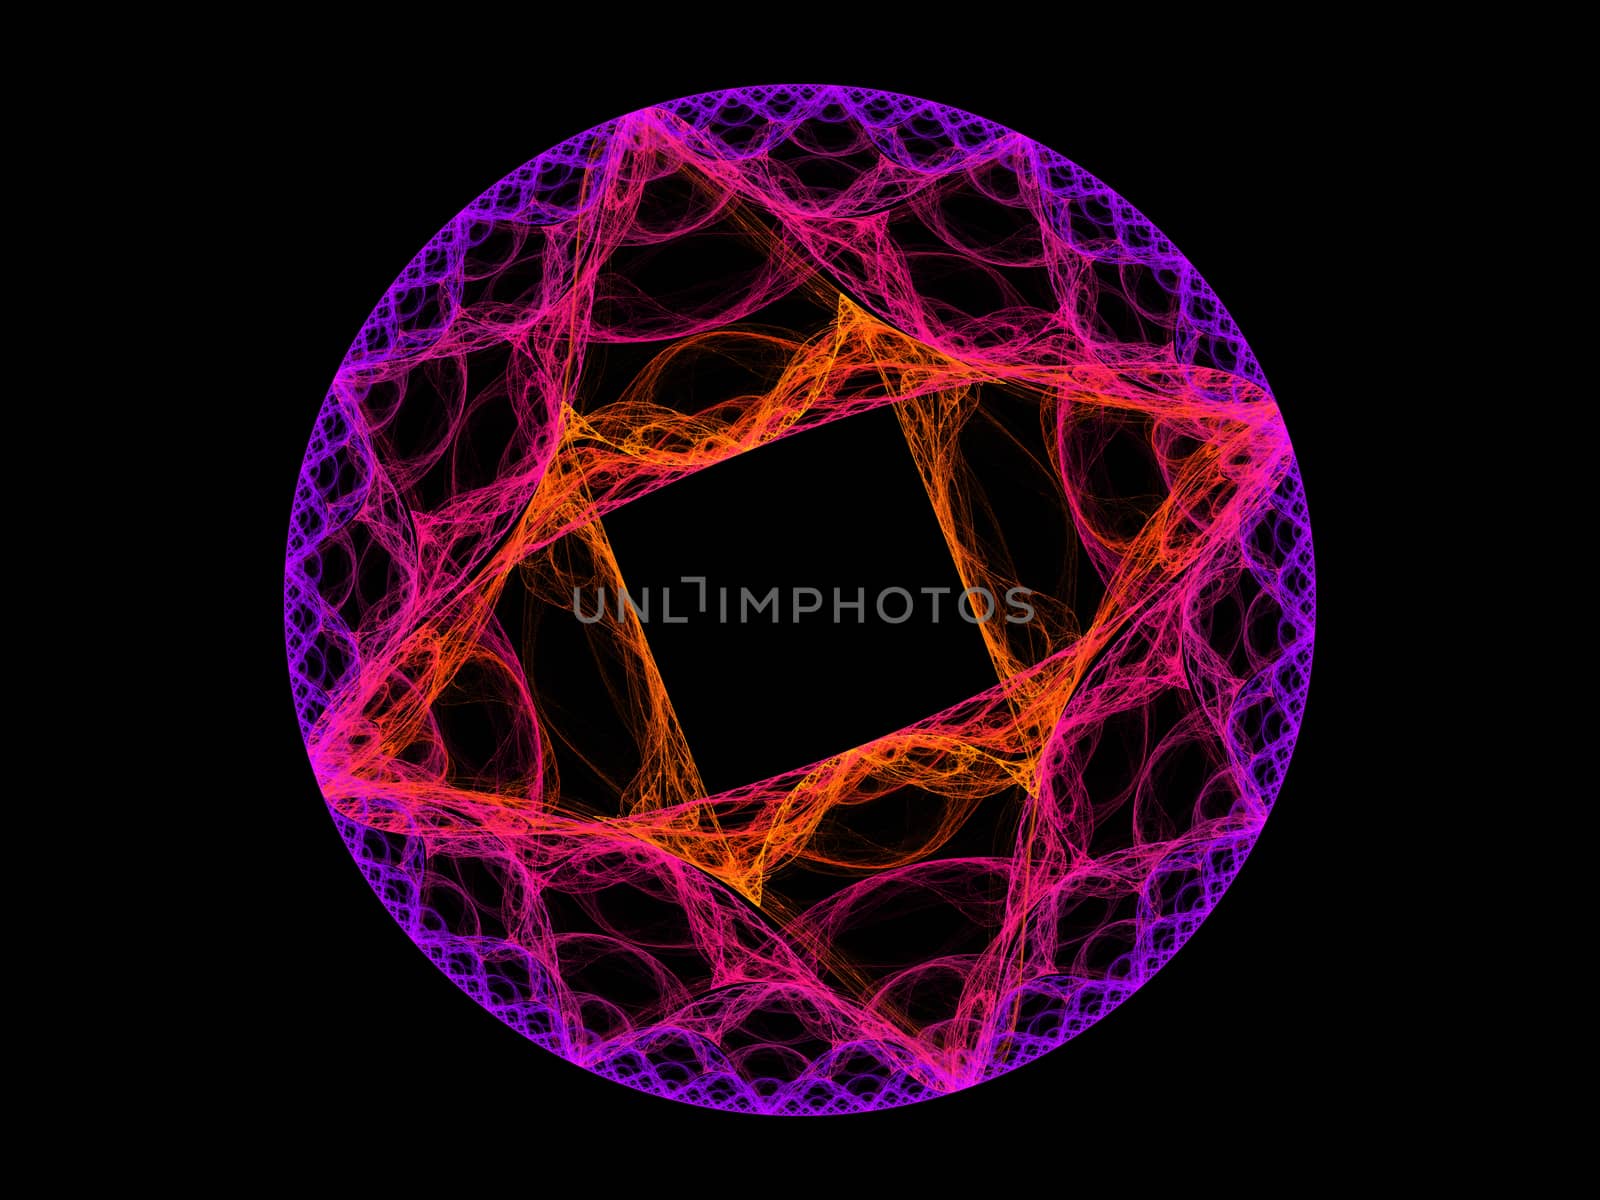 Colorful Fractal Plasma Sphere, Strings of Chaotic Plasma Energy. 
Smoke, Energy Ball Discharge, Scientific Plasma Study. Digital Flames, 
Artistic Design, Science Fiction, Abstract Illustration by Sem007